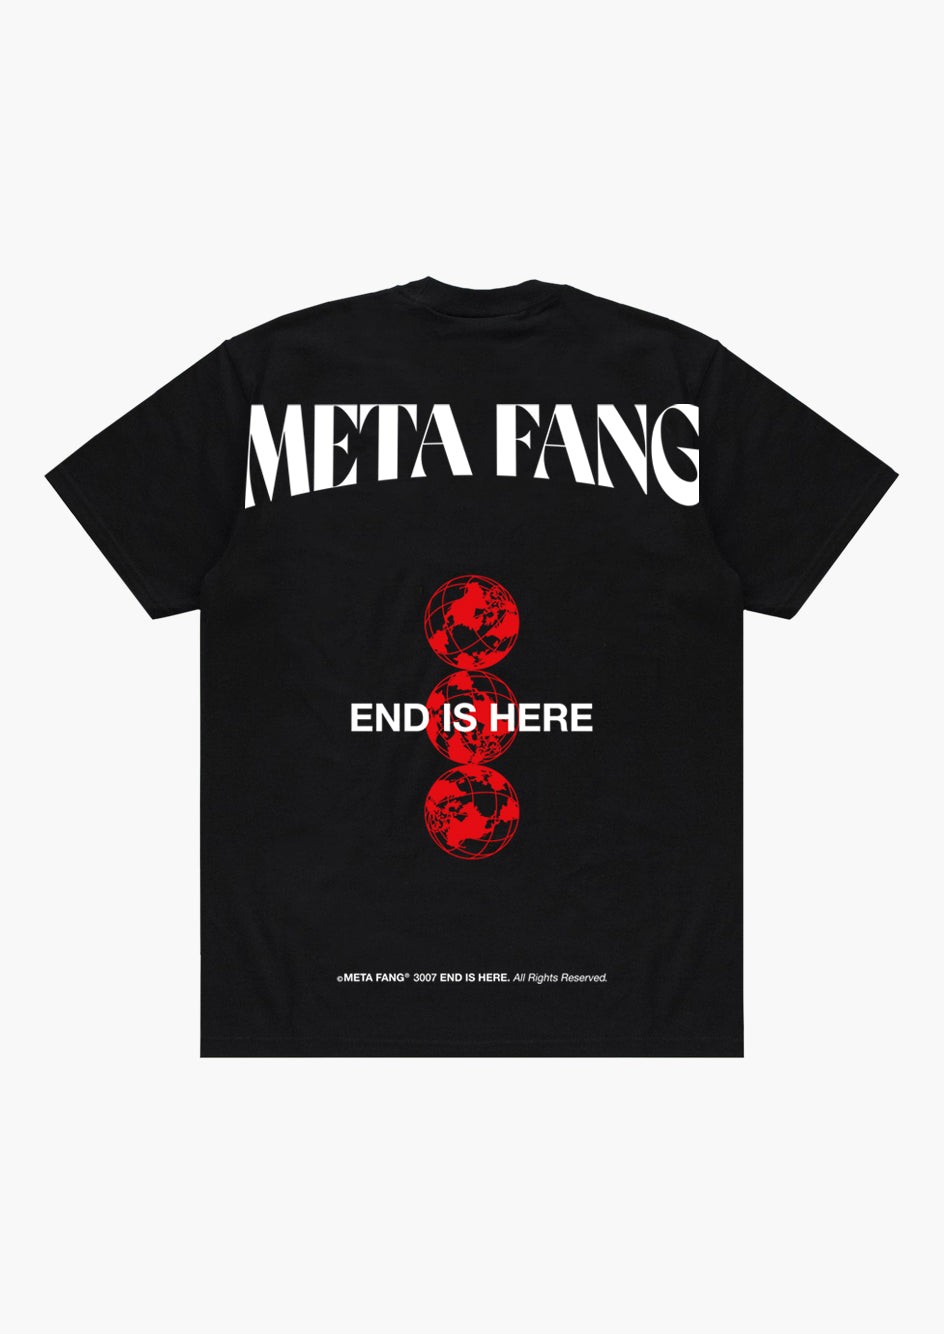 END IS HERE T-SHIRT